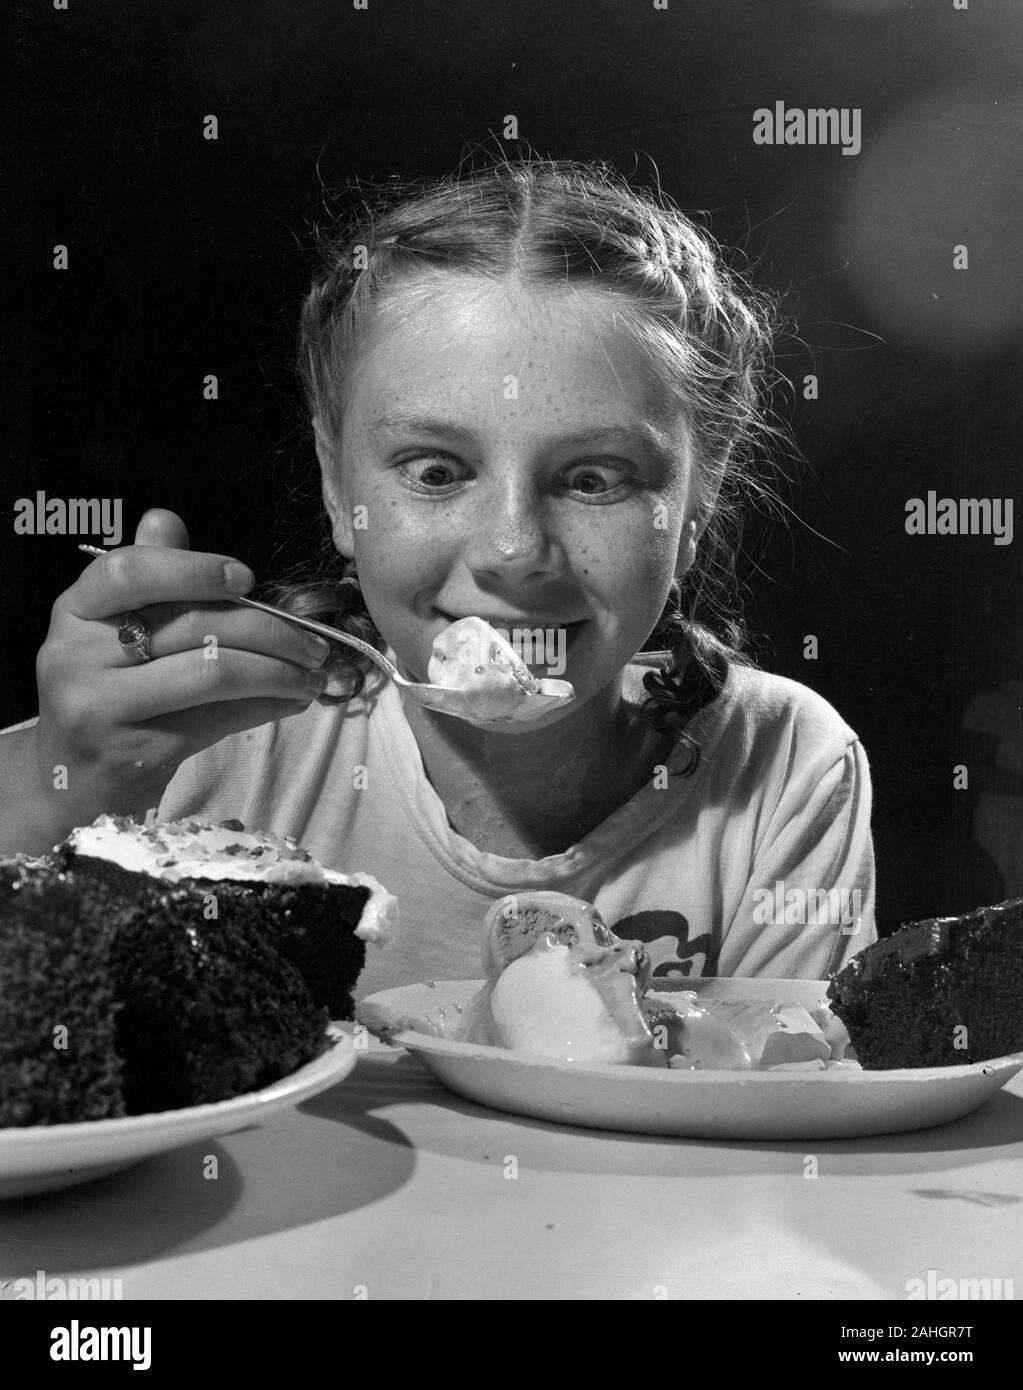 Girl eating ice cream 1946 Banque D'Images